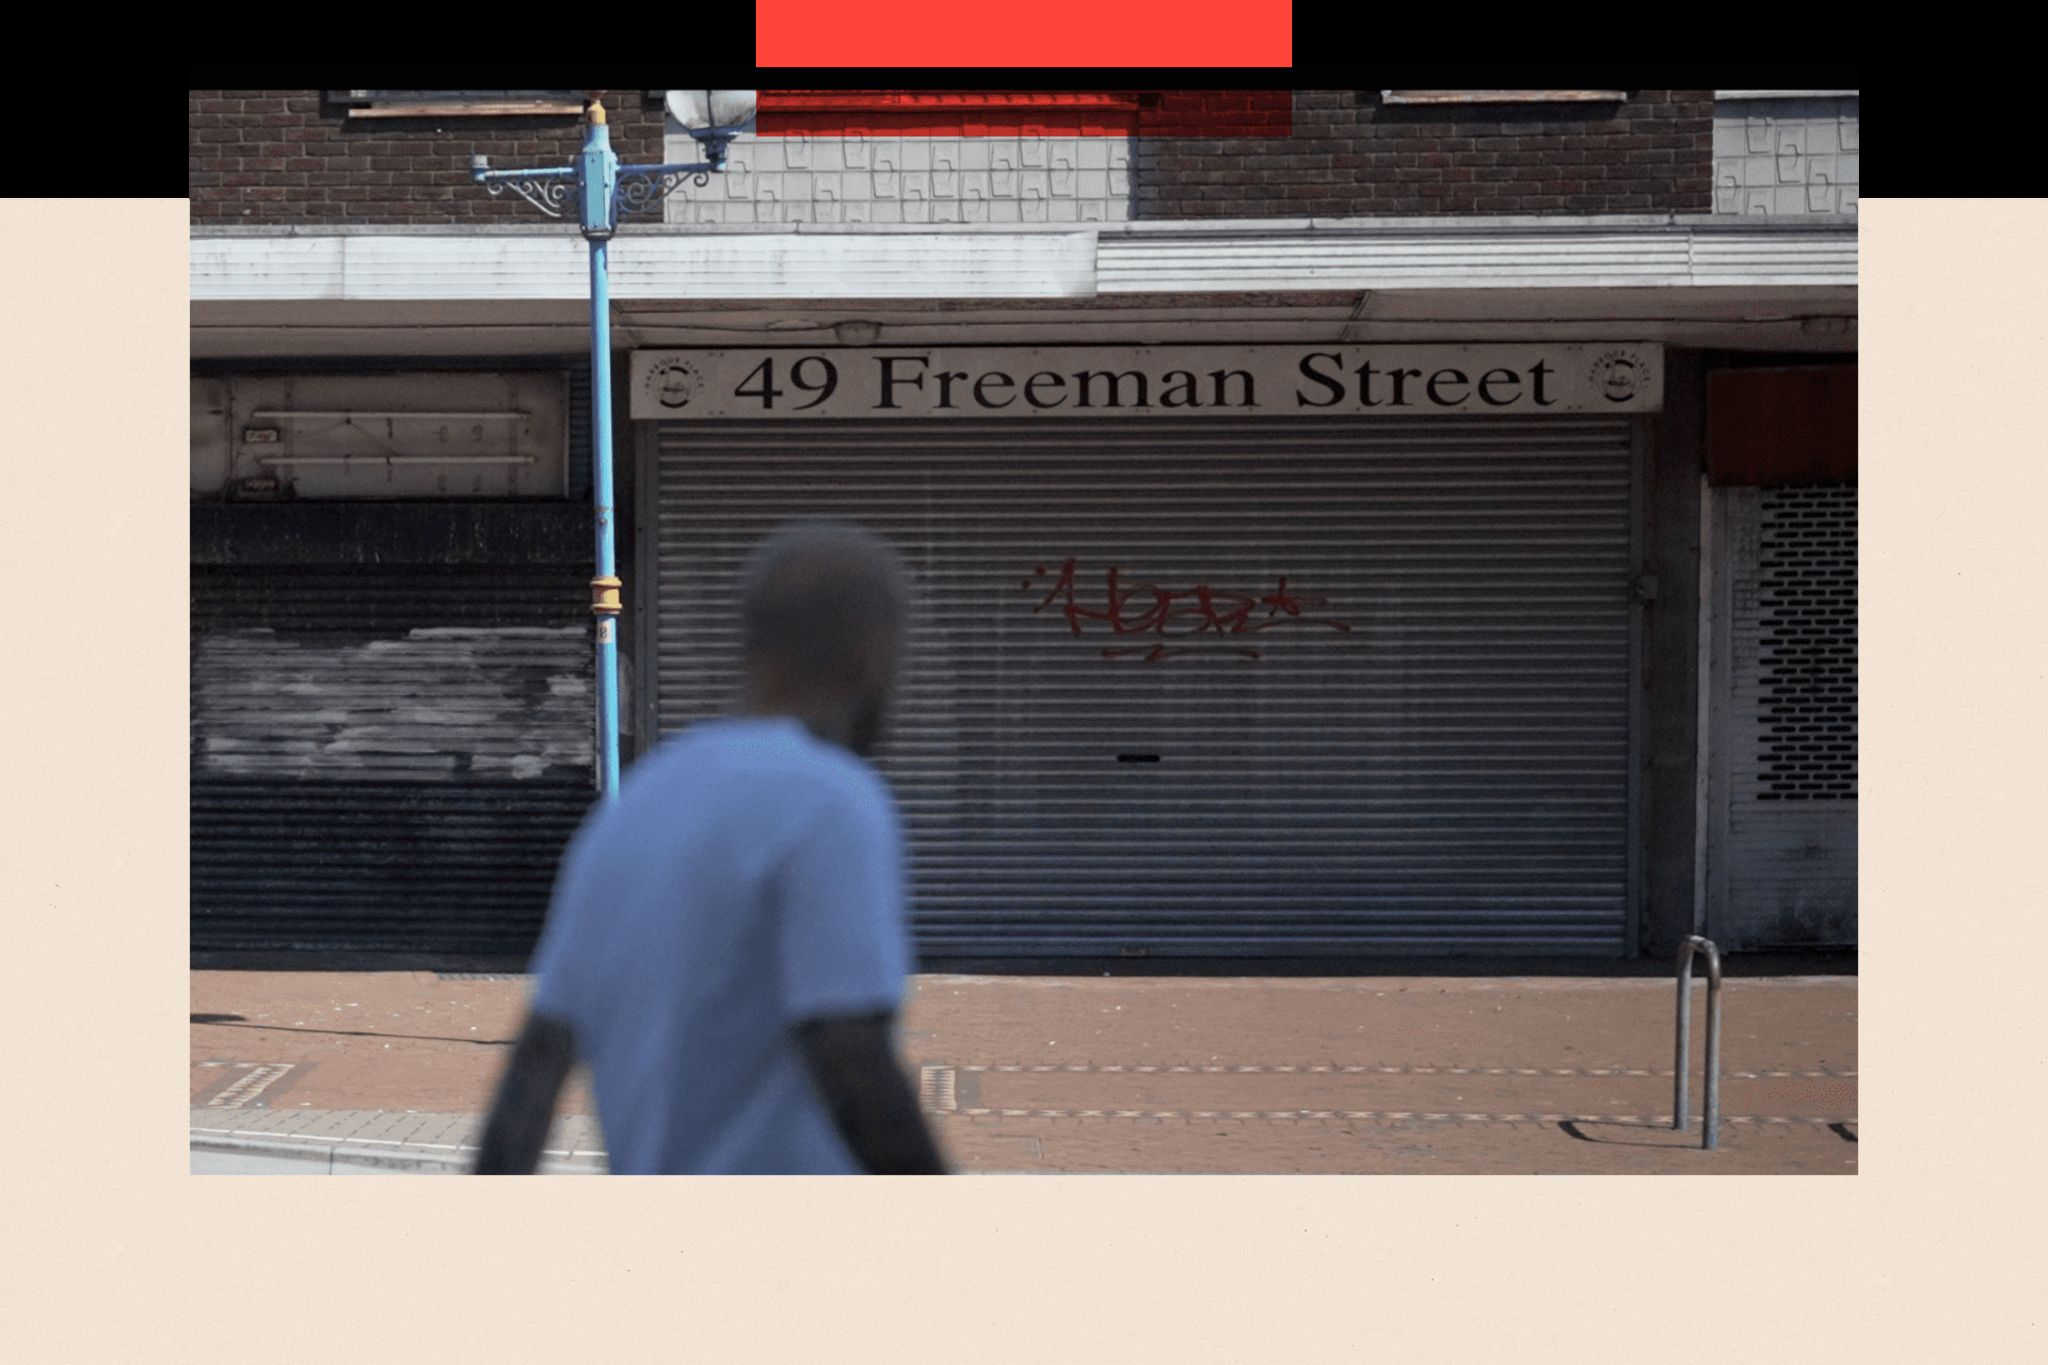 Shuttered shops in Grimsby